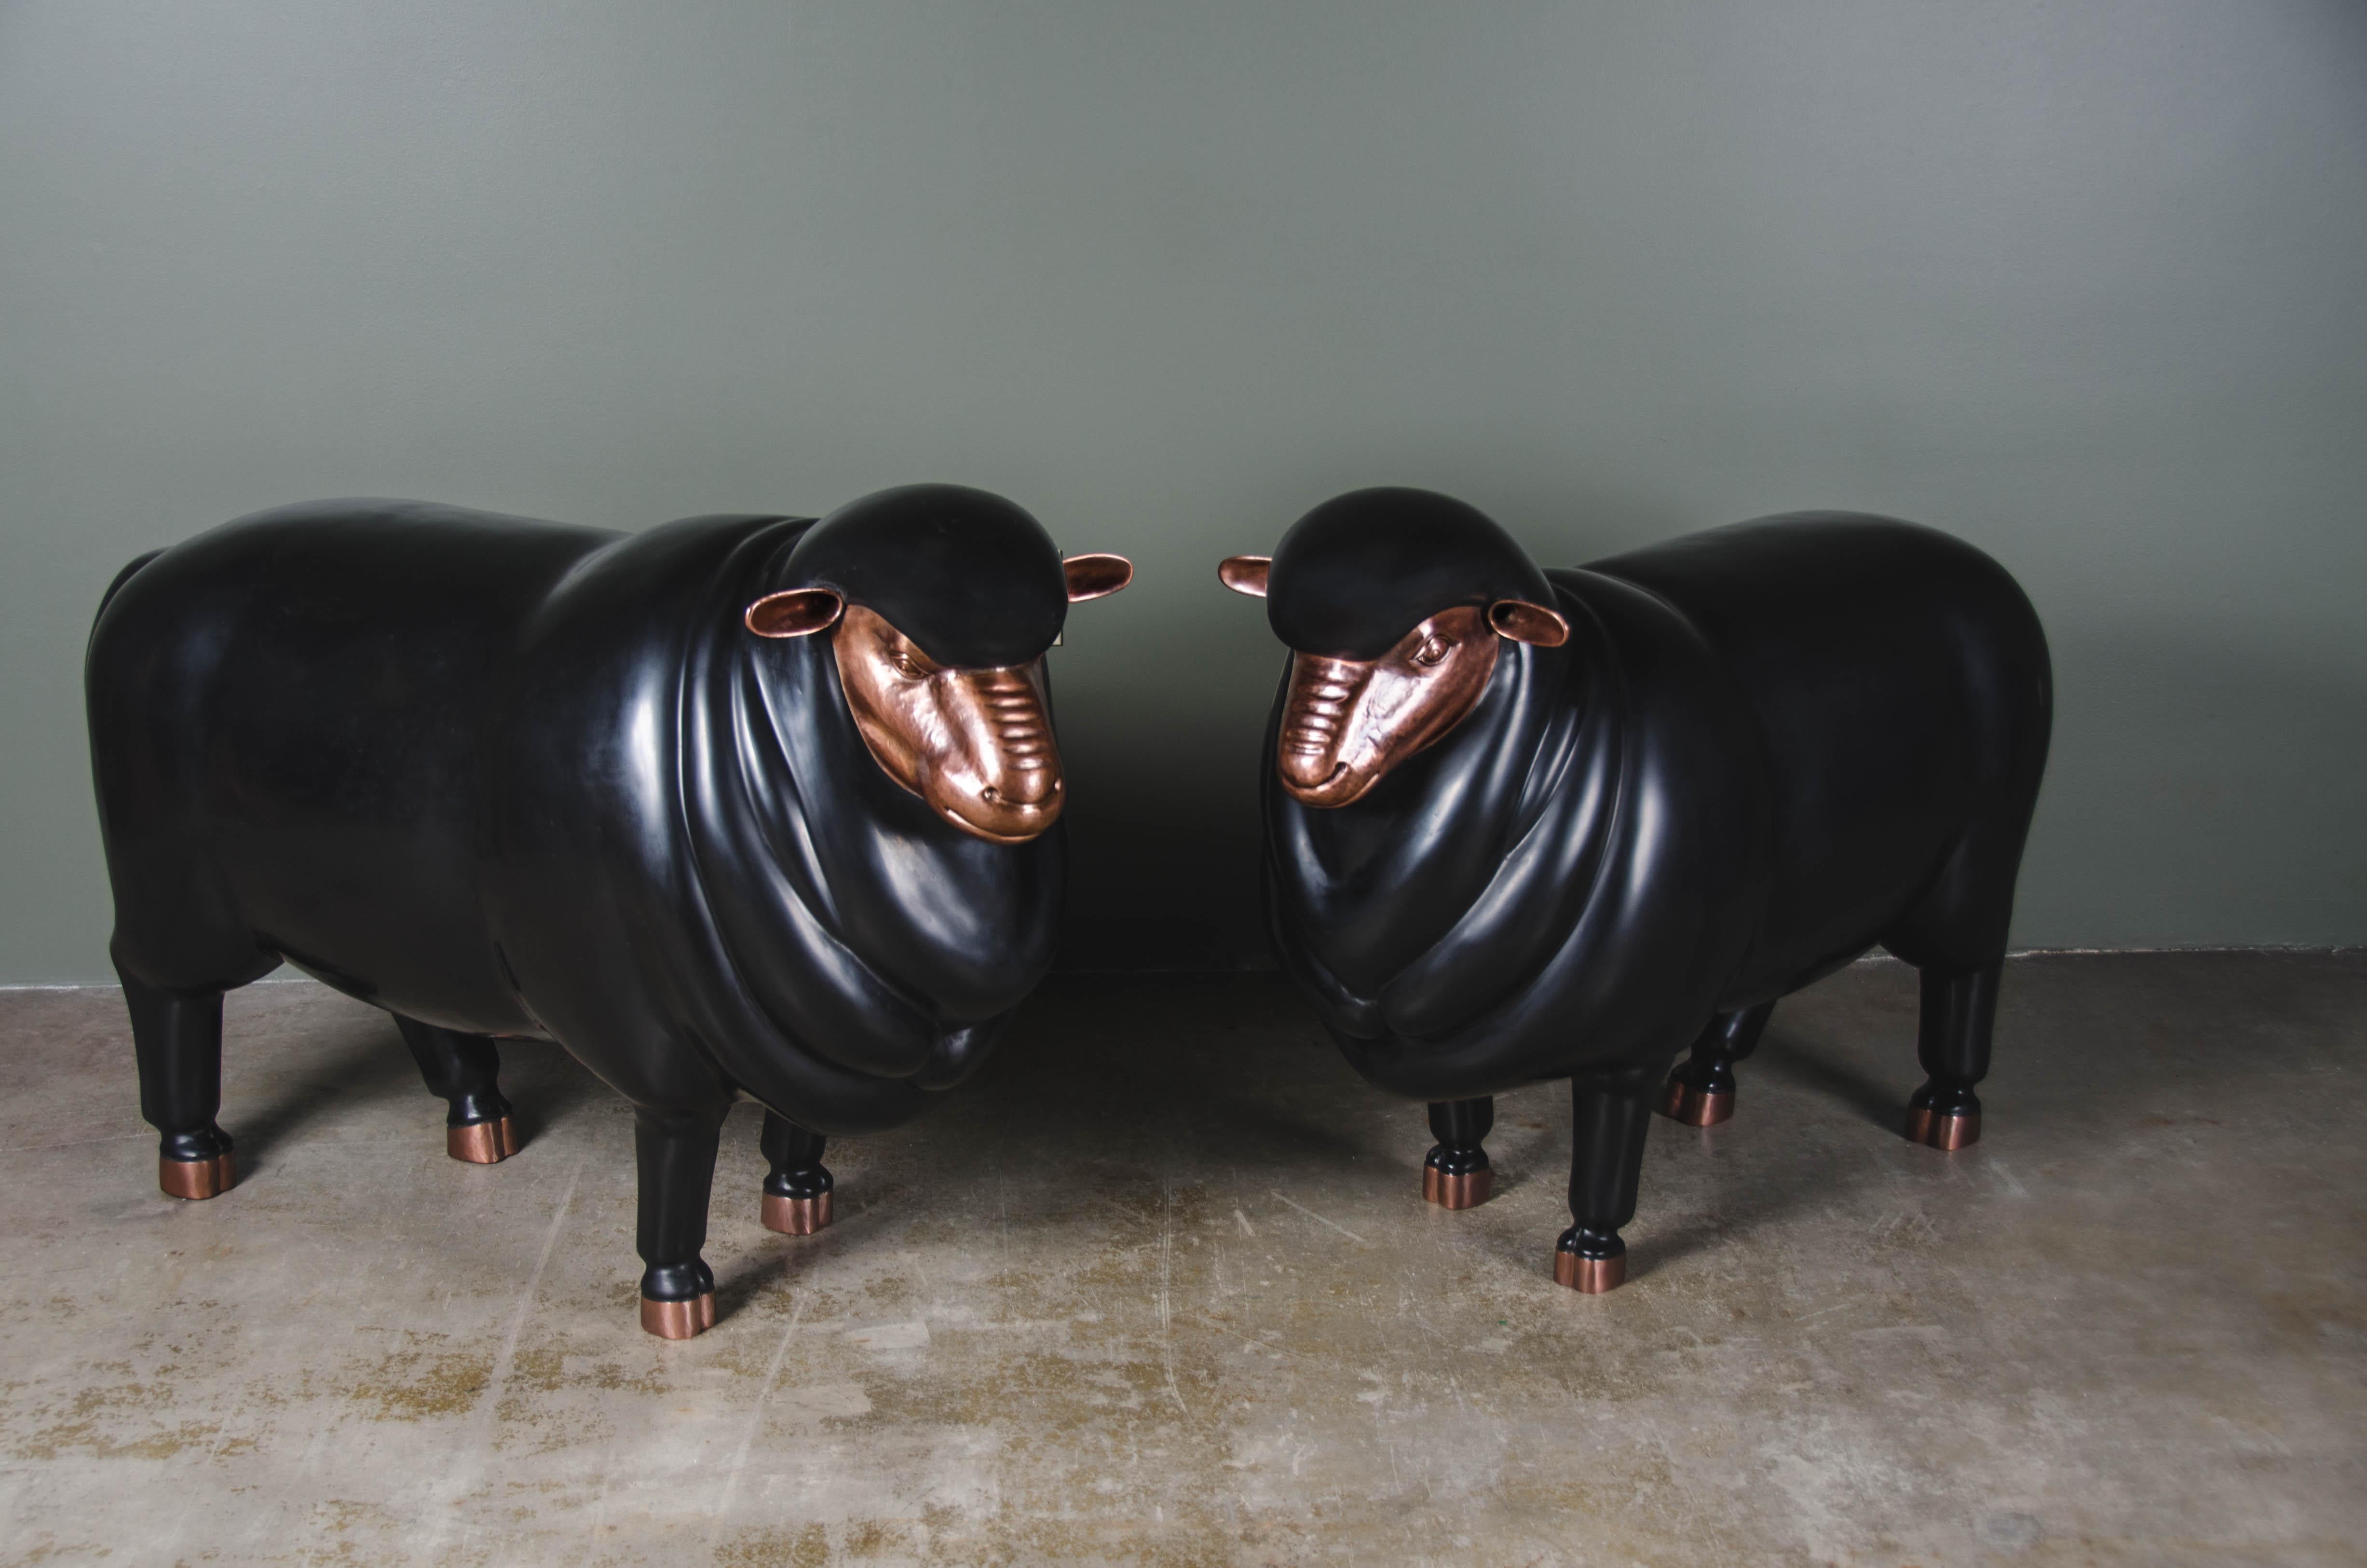 Contemporary Repoussé Black Lacquer Sheep Sculpture by Robert Kuo, Limited Edition For Sale